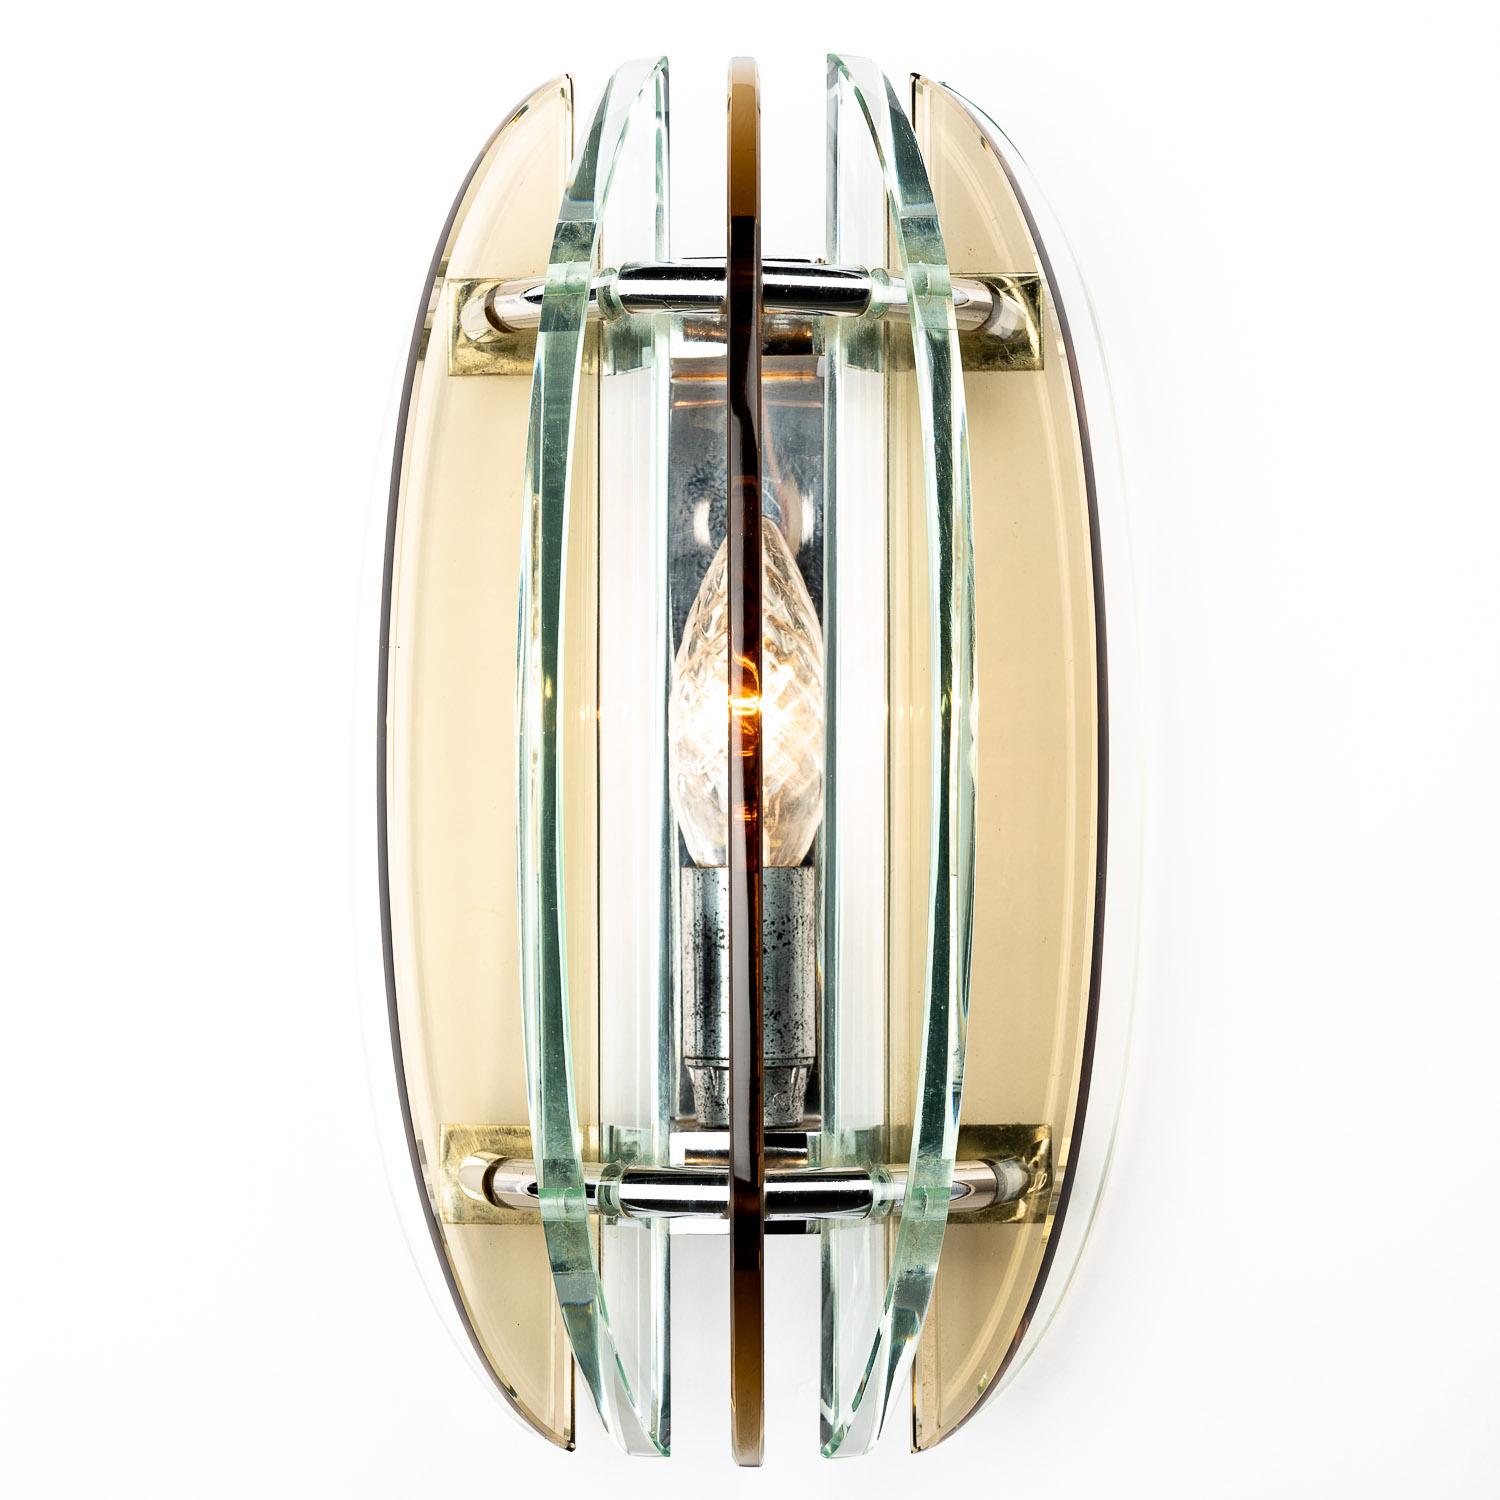 This is a stand-out piece from the designer Veca in Italy. At the cutting-edge of 1970s design, this set of lighting is bold and beautiful. Bladed glass wedges brownish colour, surrounding a single E14 bulb. Authenticity is guaranteed with the